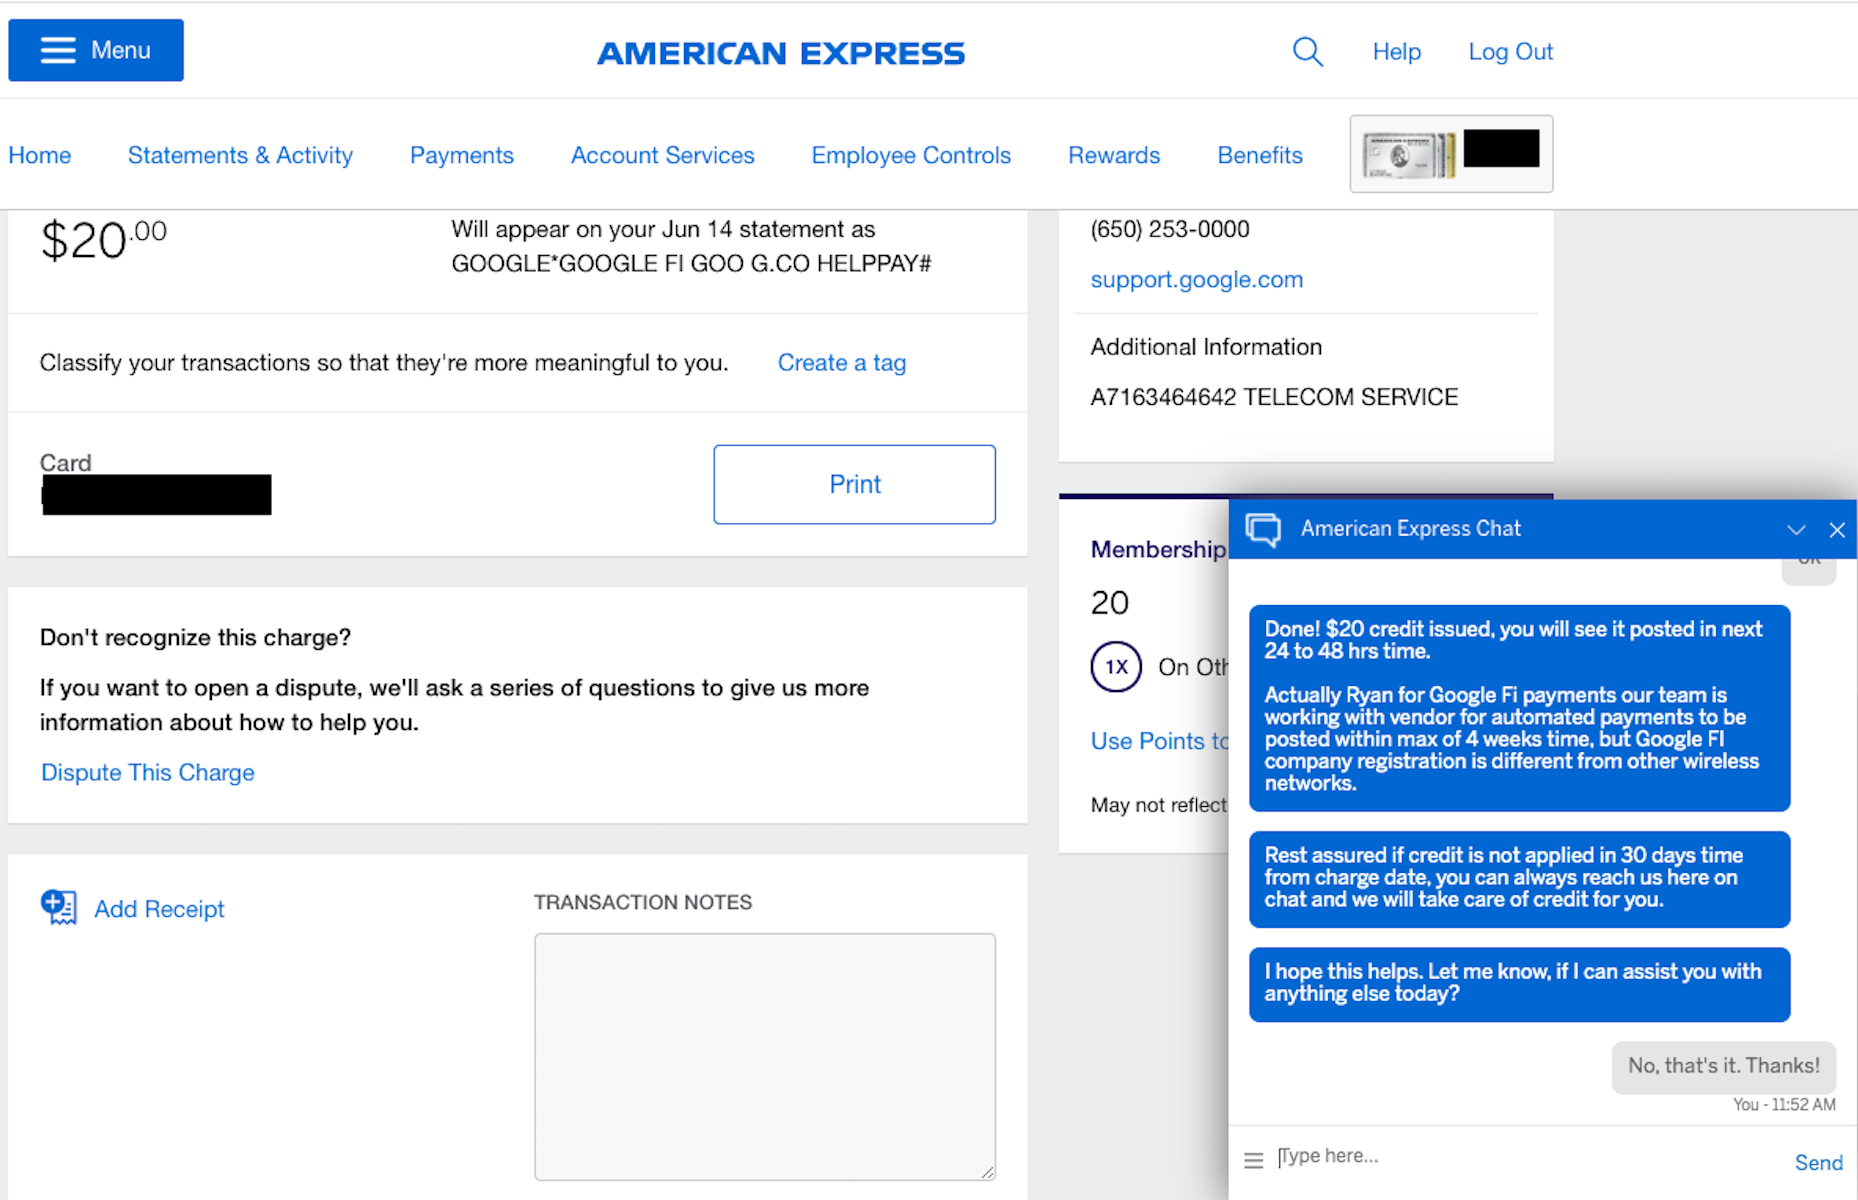 Amex chat rep admits to issues with Google Fi wireless credits